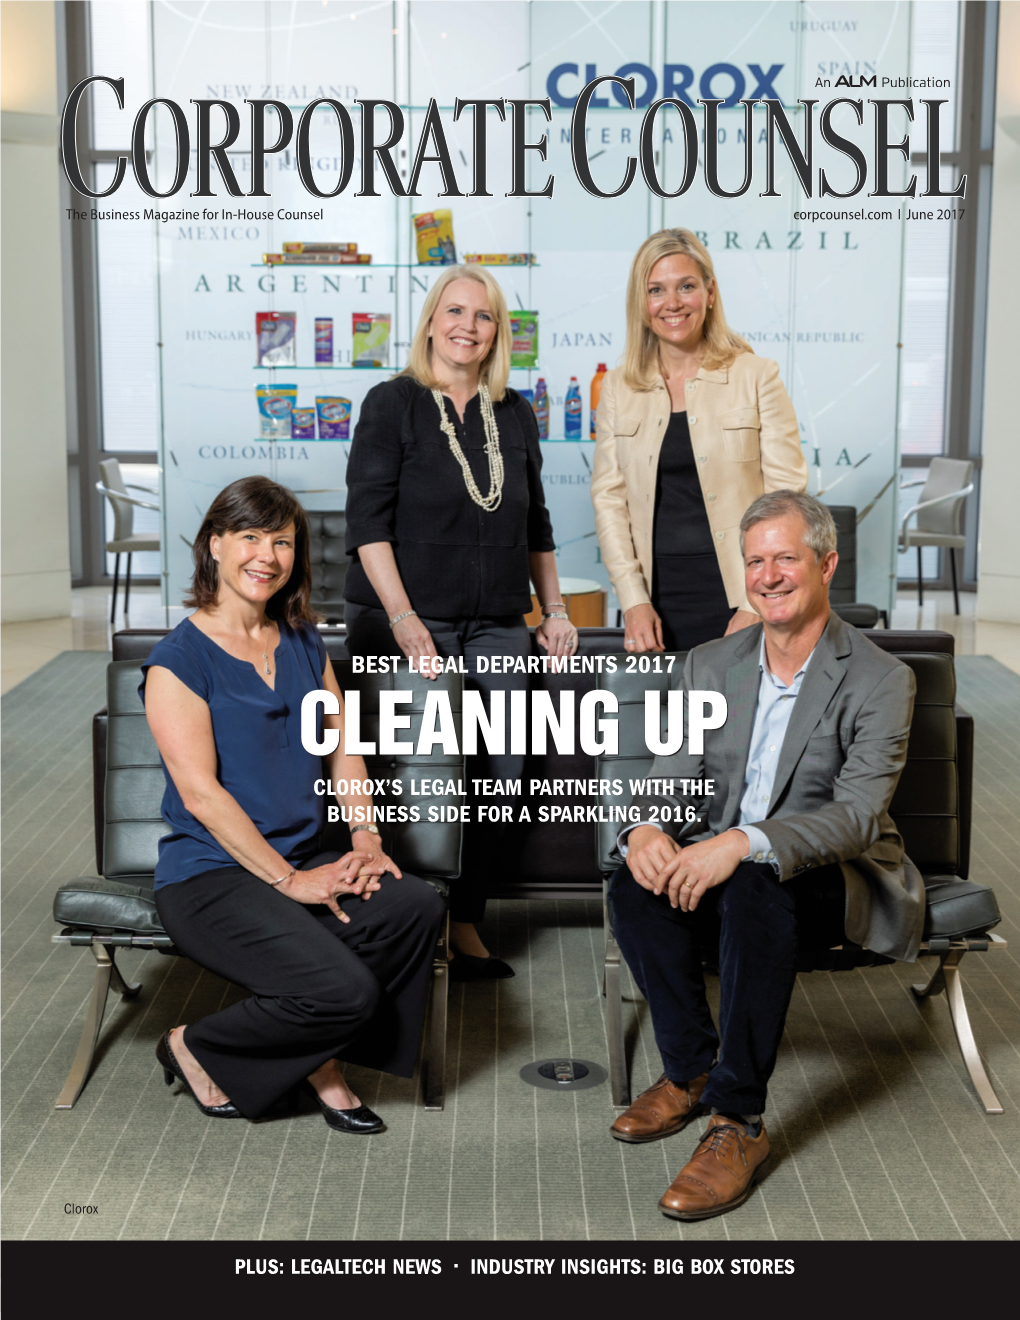 Cleaning up Cleaning Ch Legalte Plus: Logo Has a .5 Stroke Has Logo the Business Magazine for In-House Magazine Business Counsel for the Clorox